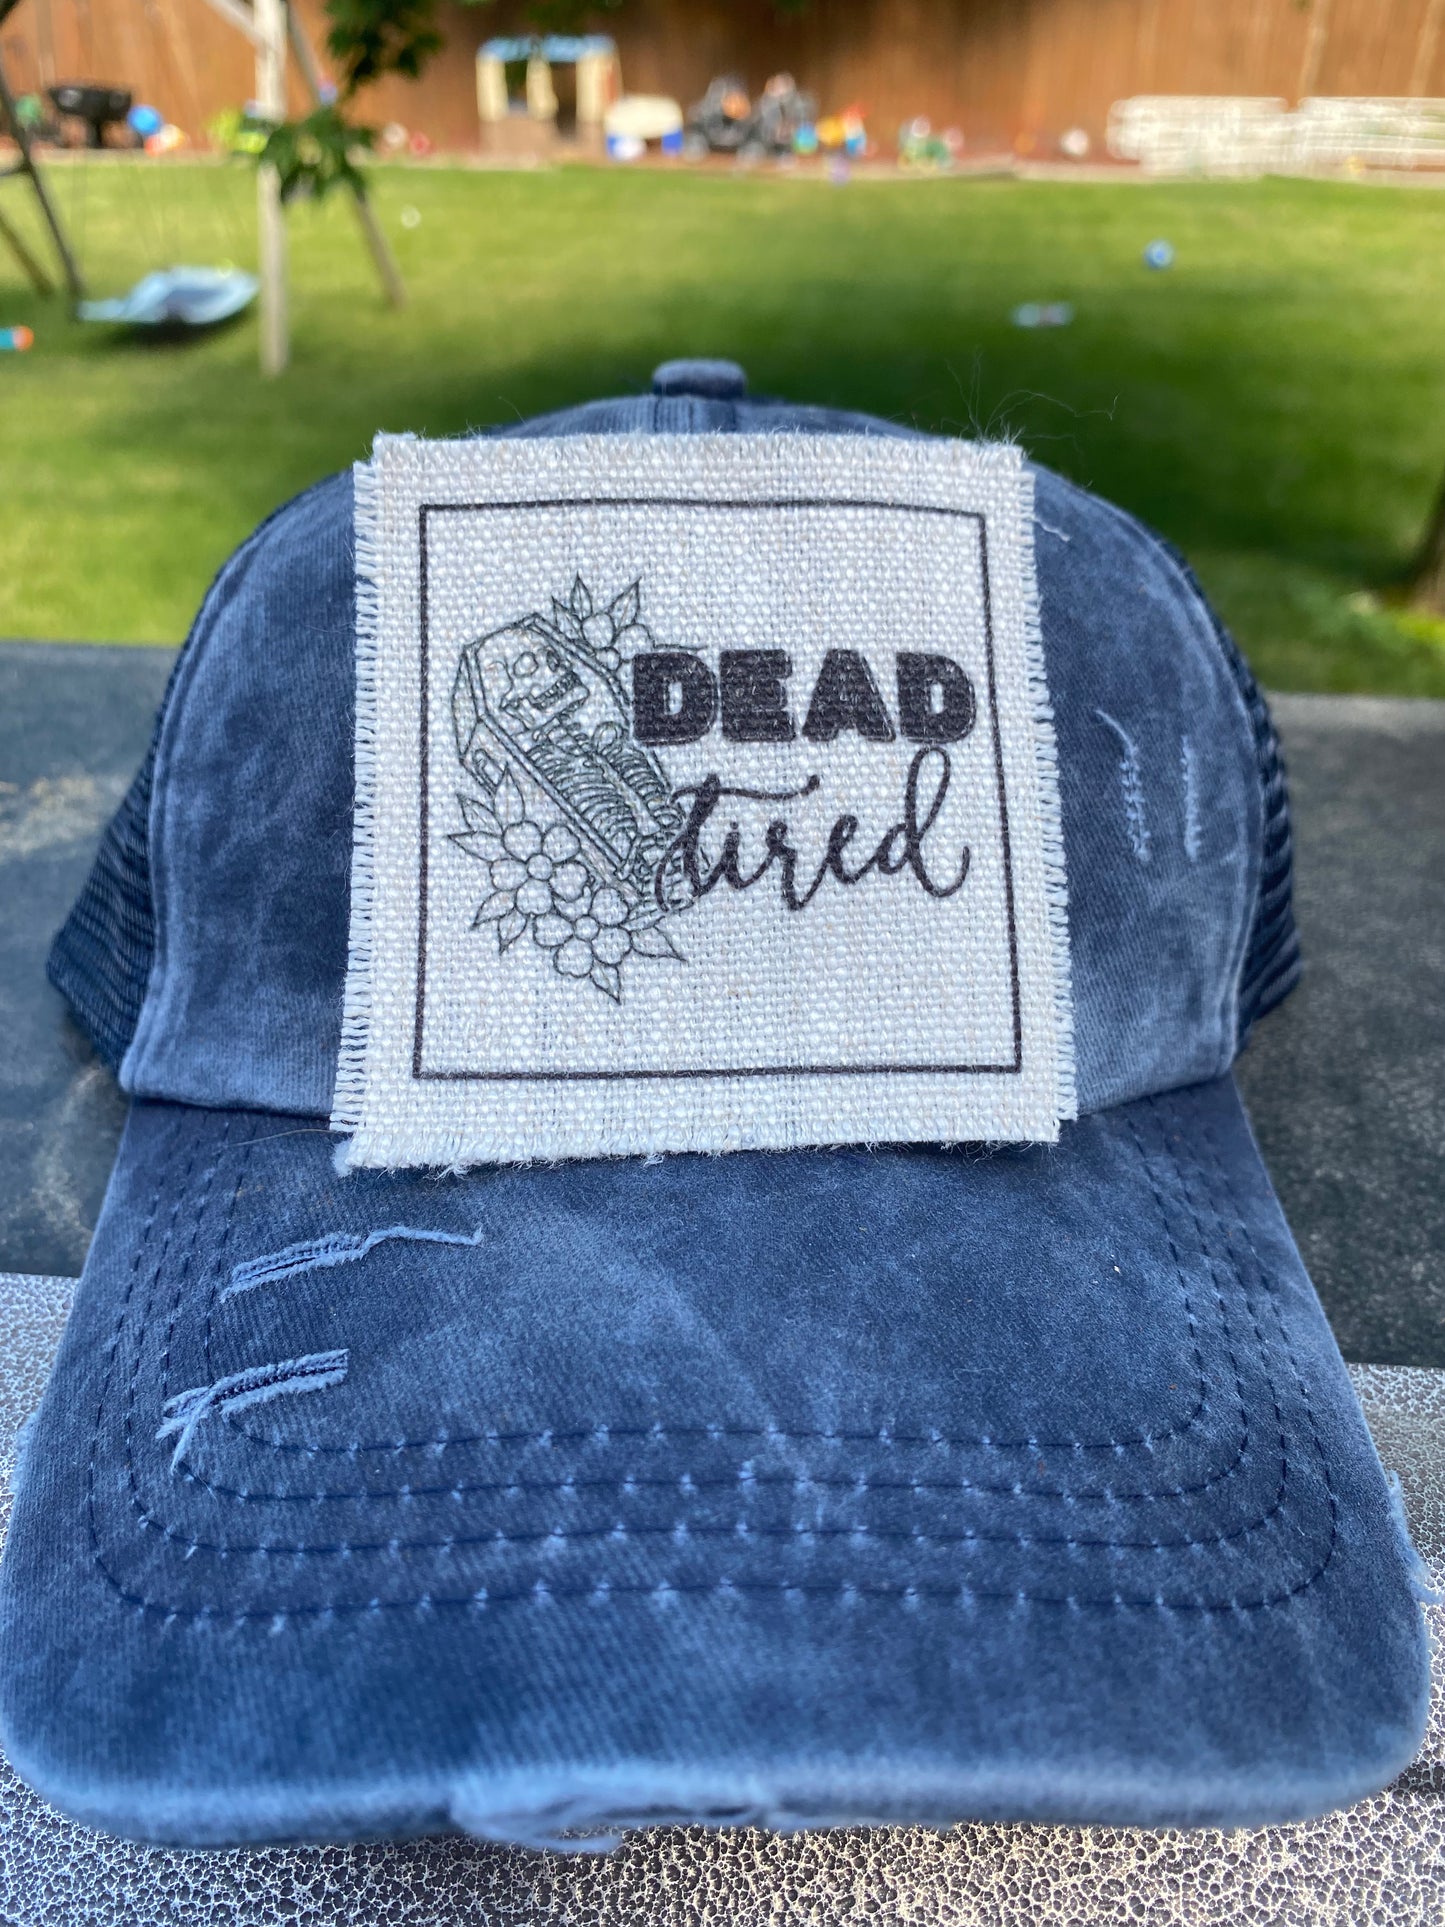 Dead Tried with Coffin Hat Patch